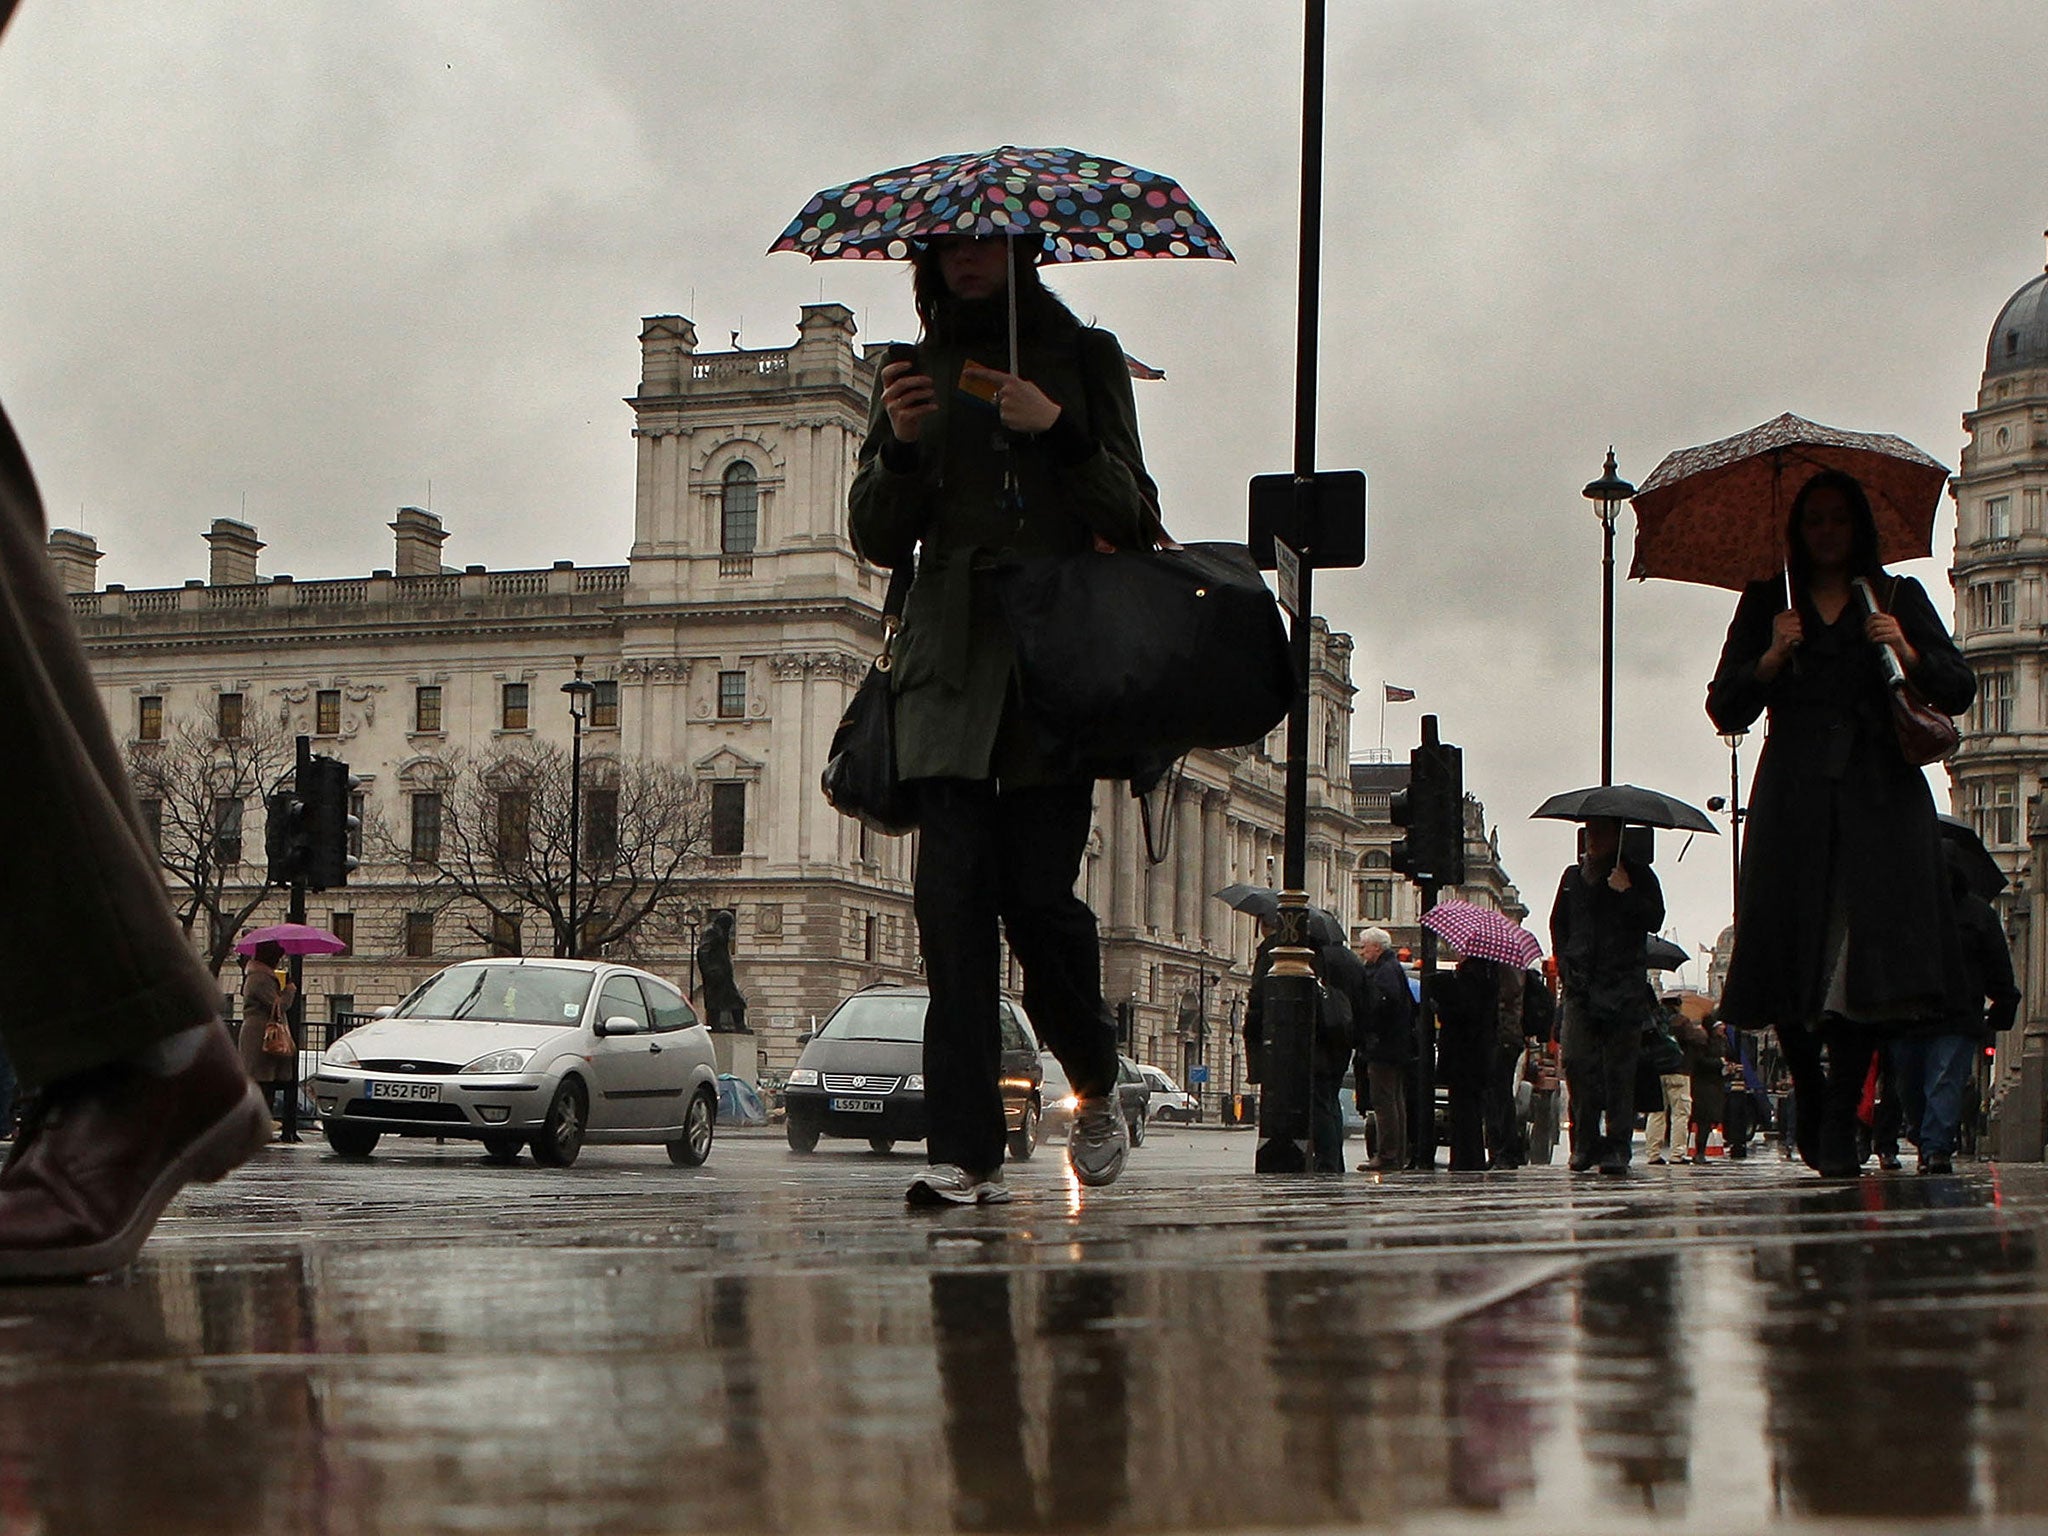 UK set for rain this weekend